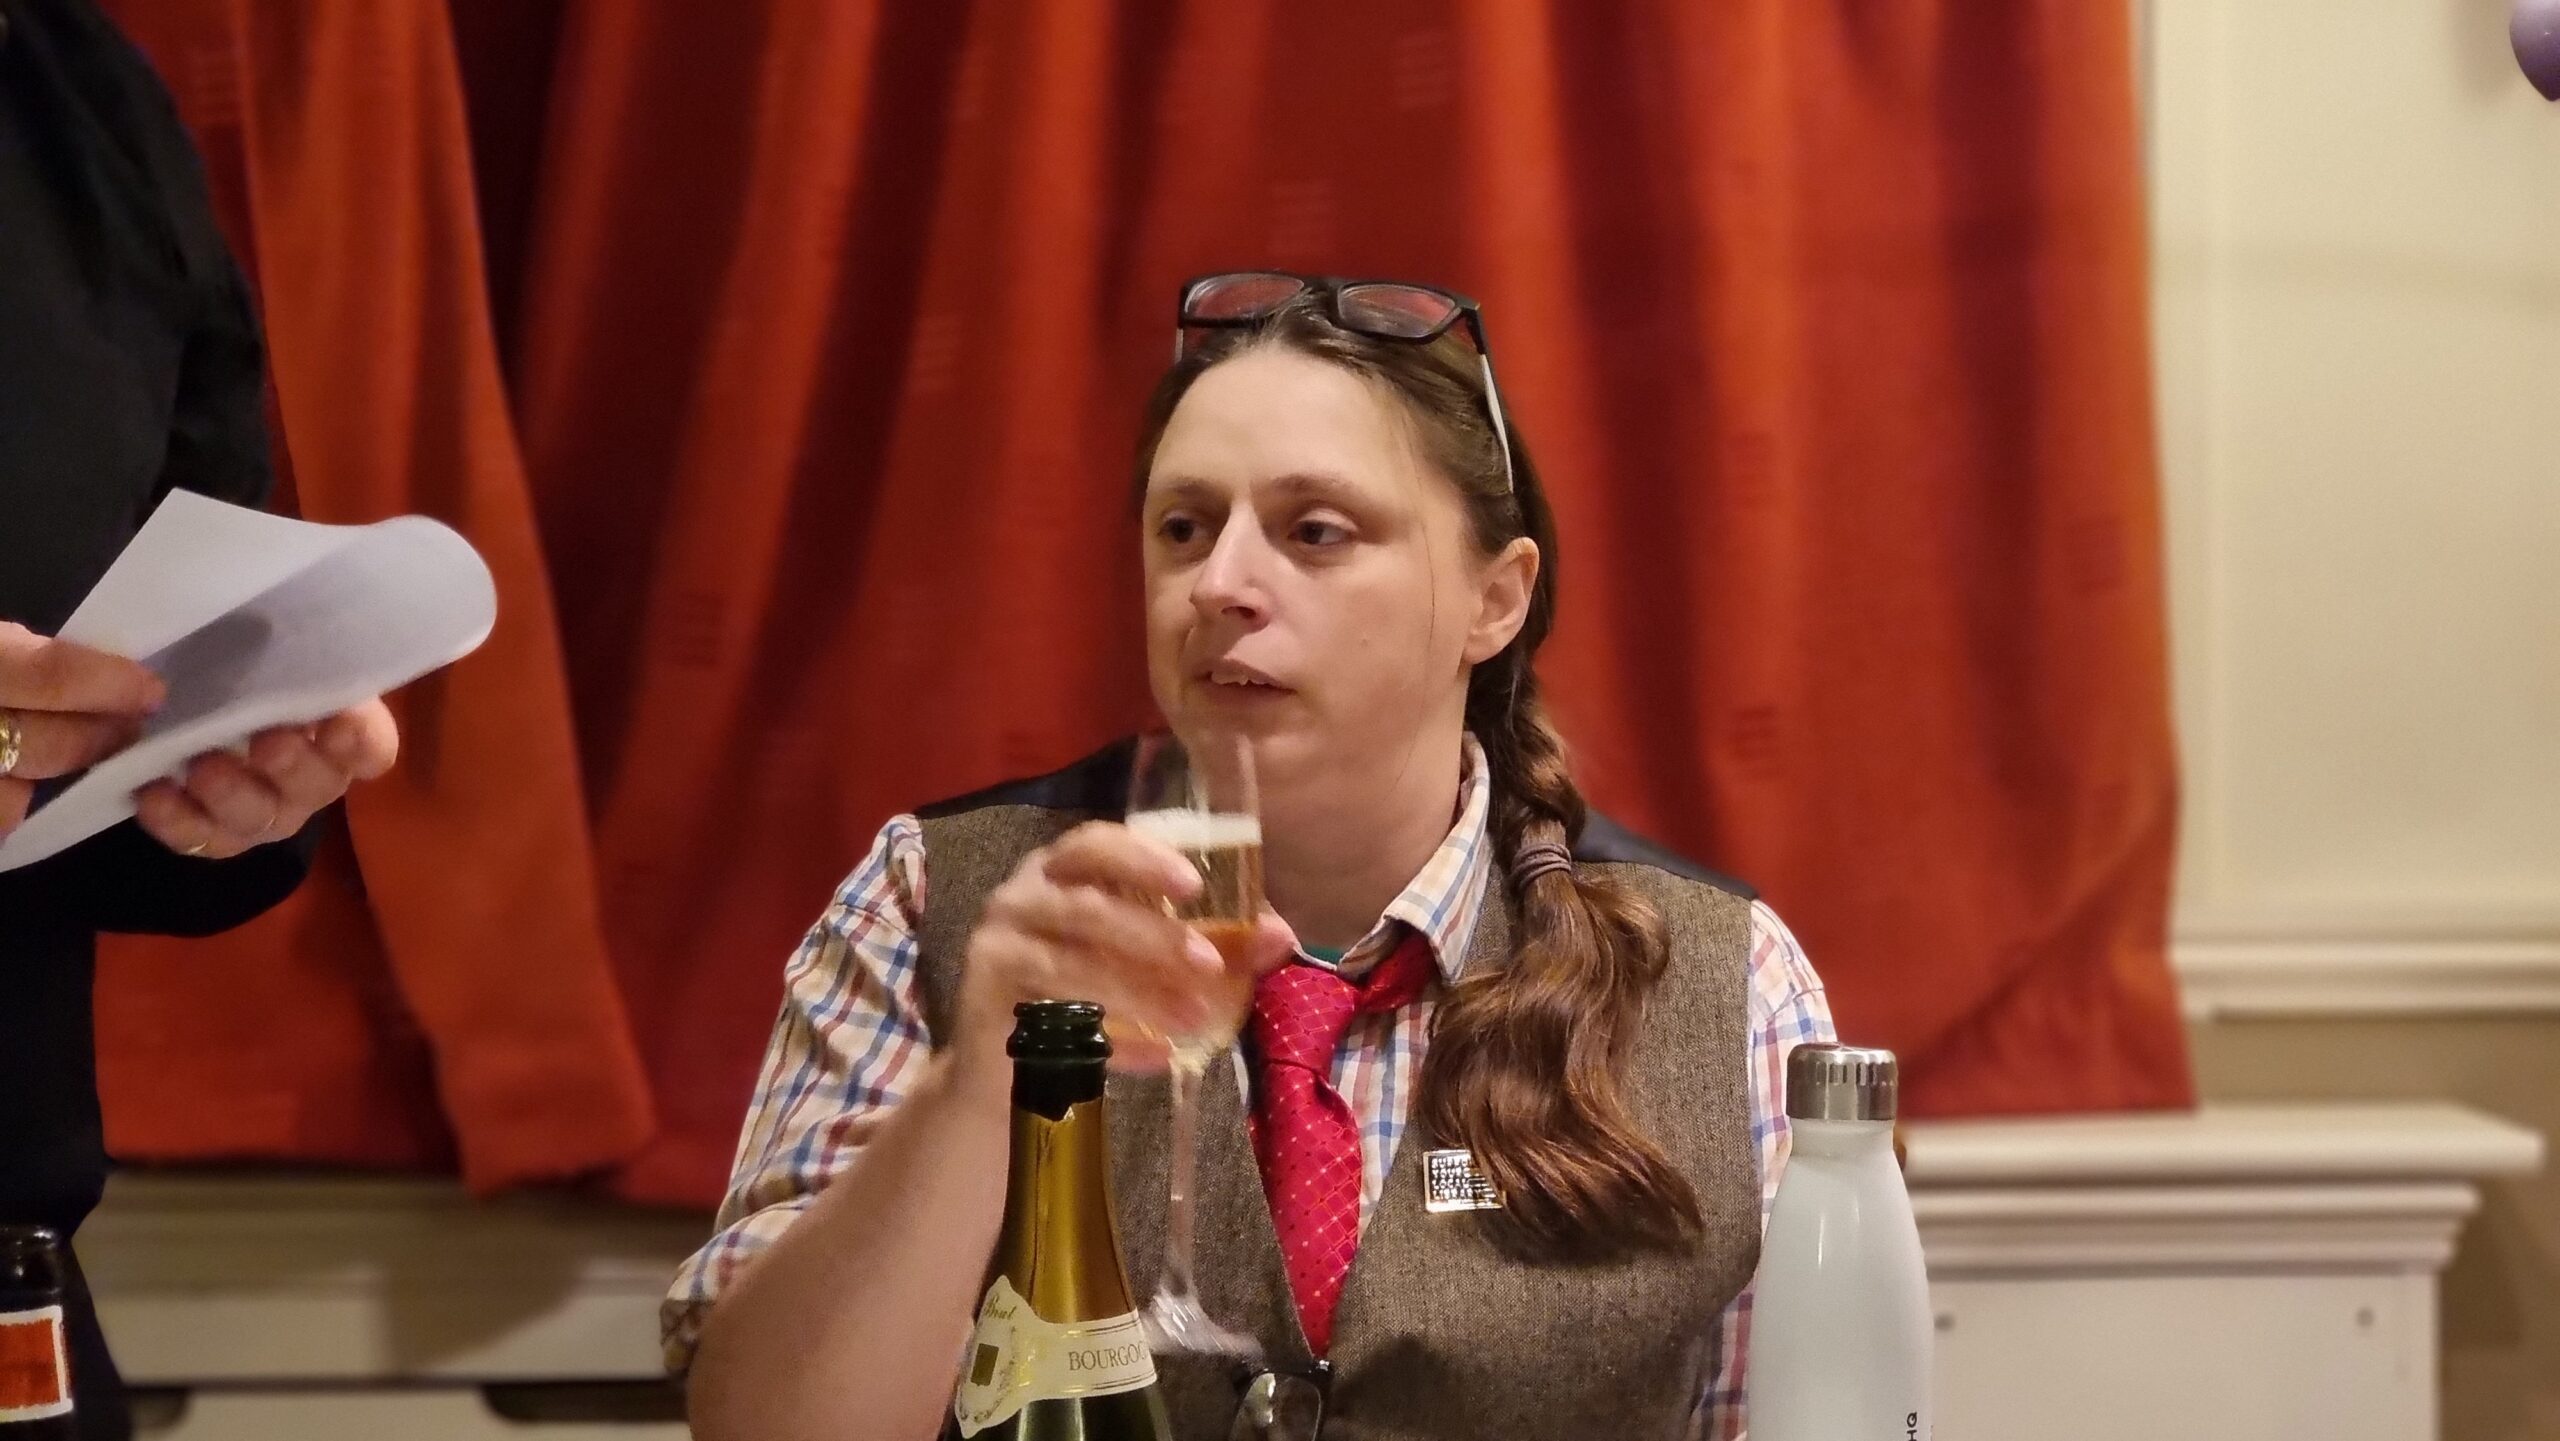 A woman dressed in a tweed waistcoat, glasses perched atop her head, sips a glass of champagne.